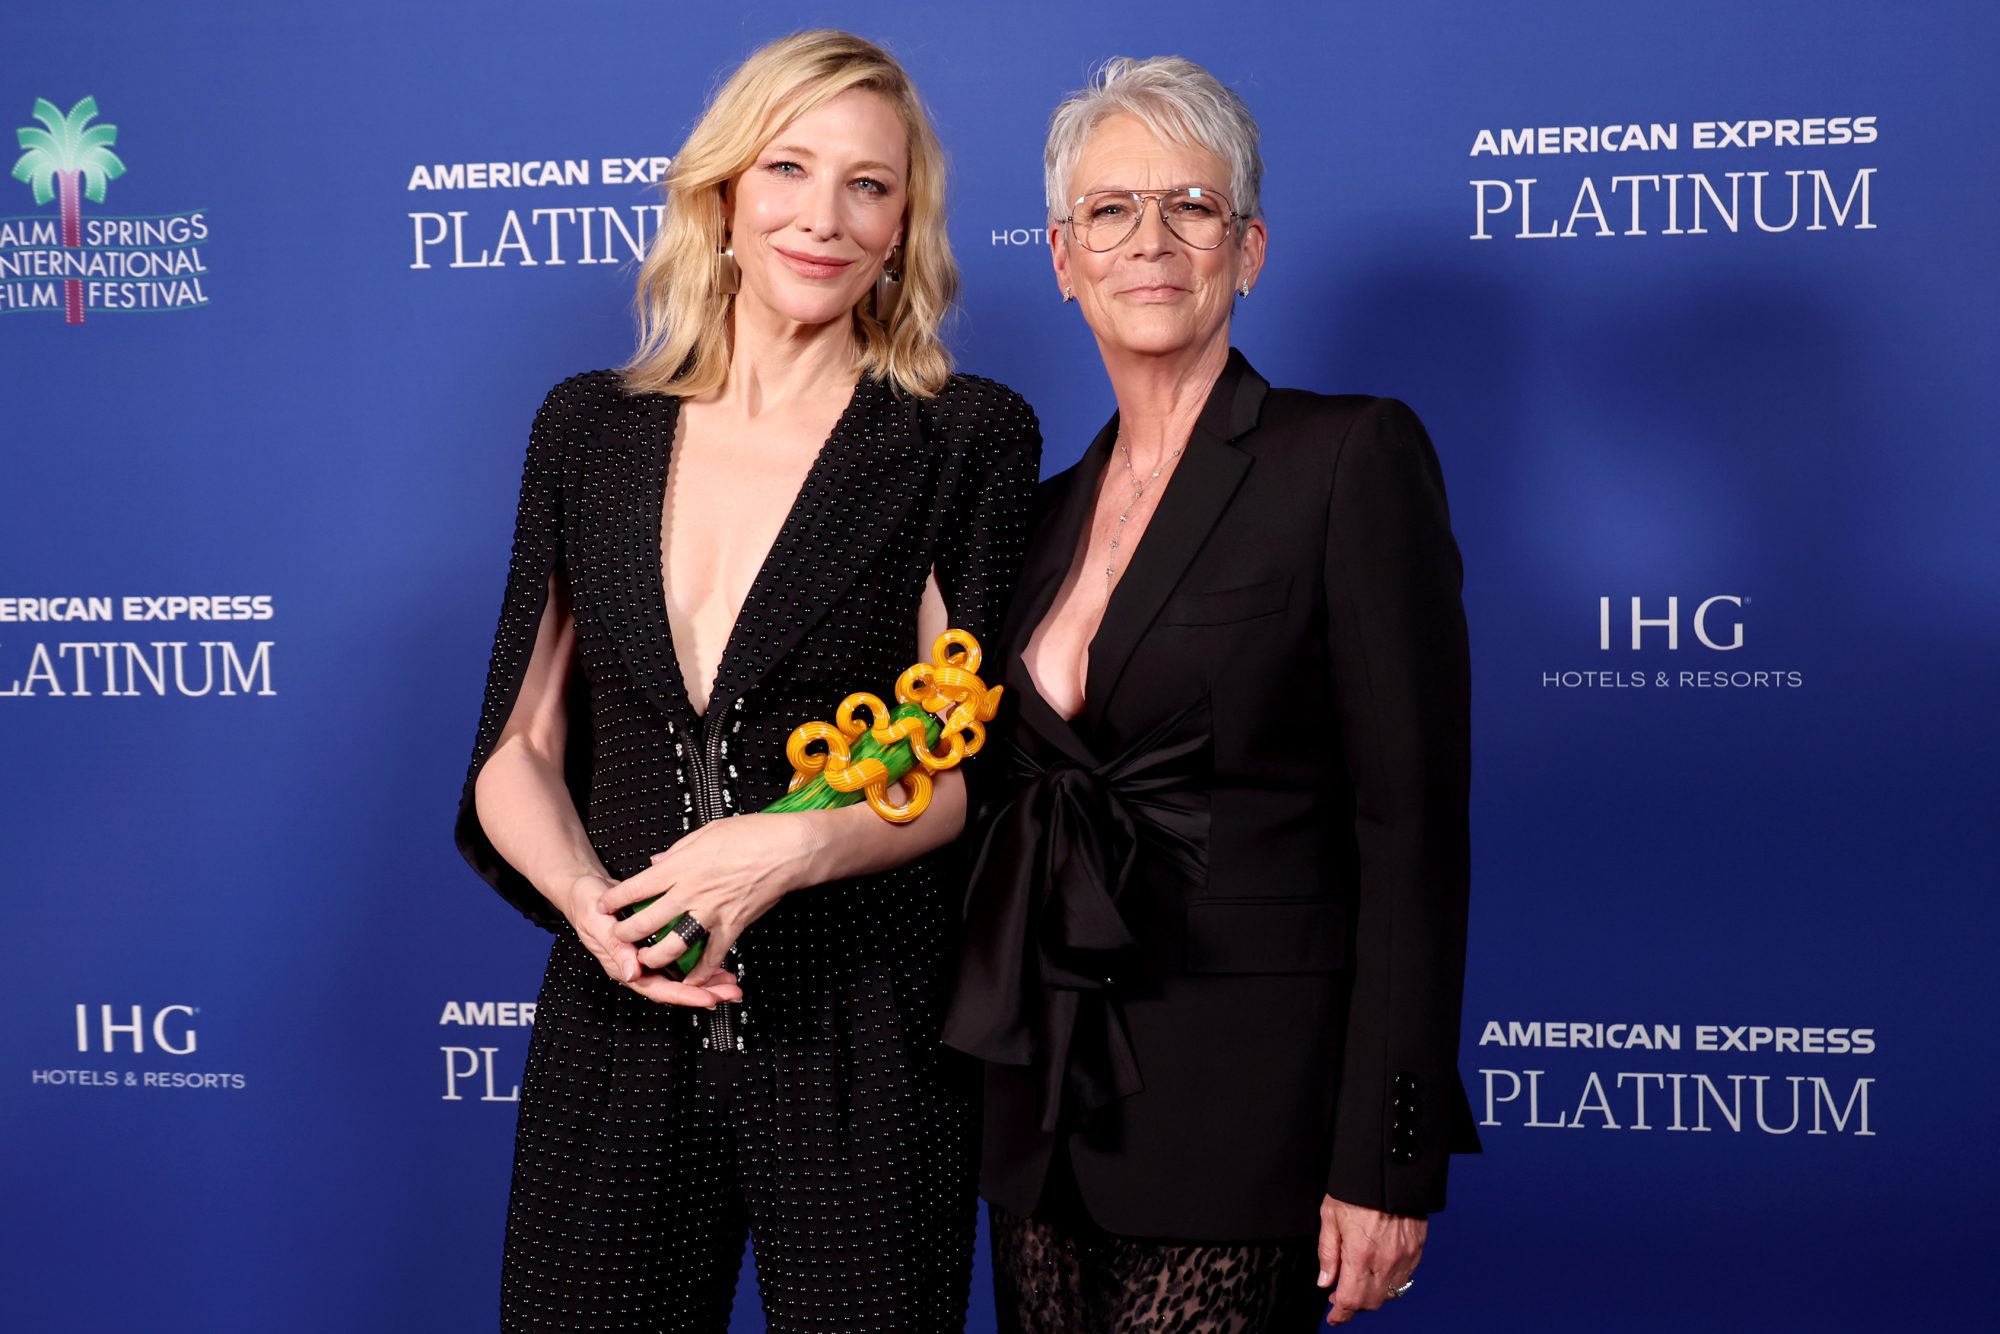 PALM SPRINGS, CALIFORNIA - JANUARY 05: (L-R) Cate Blanchett, winner of the Desert Palm Achievement Award, and Jamie Lee Curtis pose backstage during the 34th Annual Palm Springs International Film Awards at Palm Springs Convention Center on January 05, 2023 in Palm Springs, California. (Photo by Amy Sussman/Getty Images for Palm Springs International Film Society)